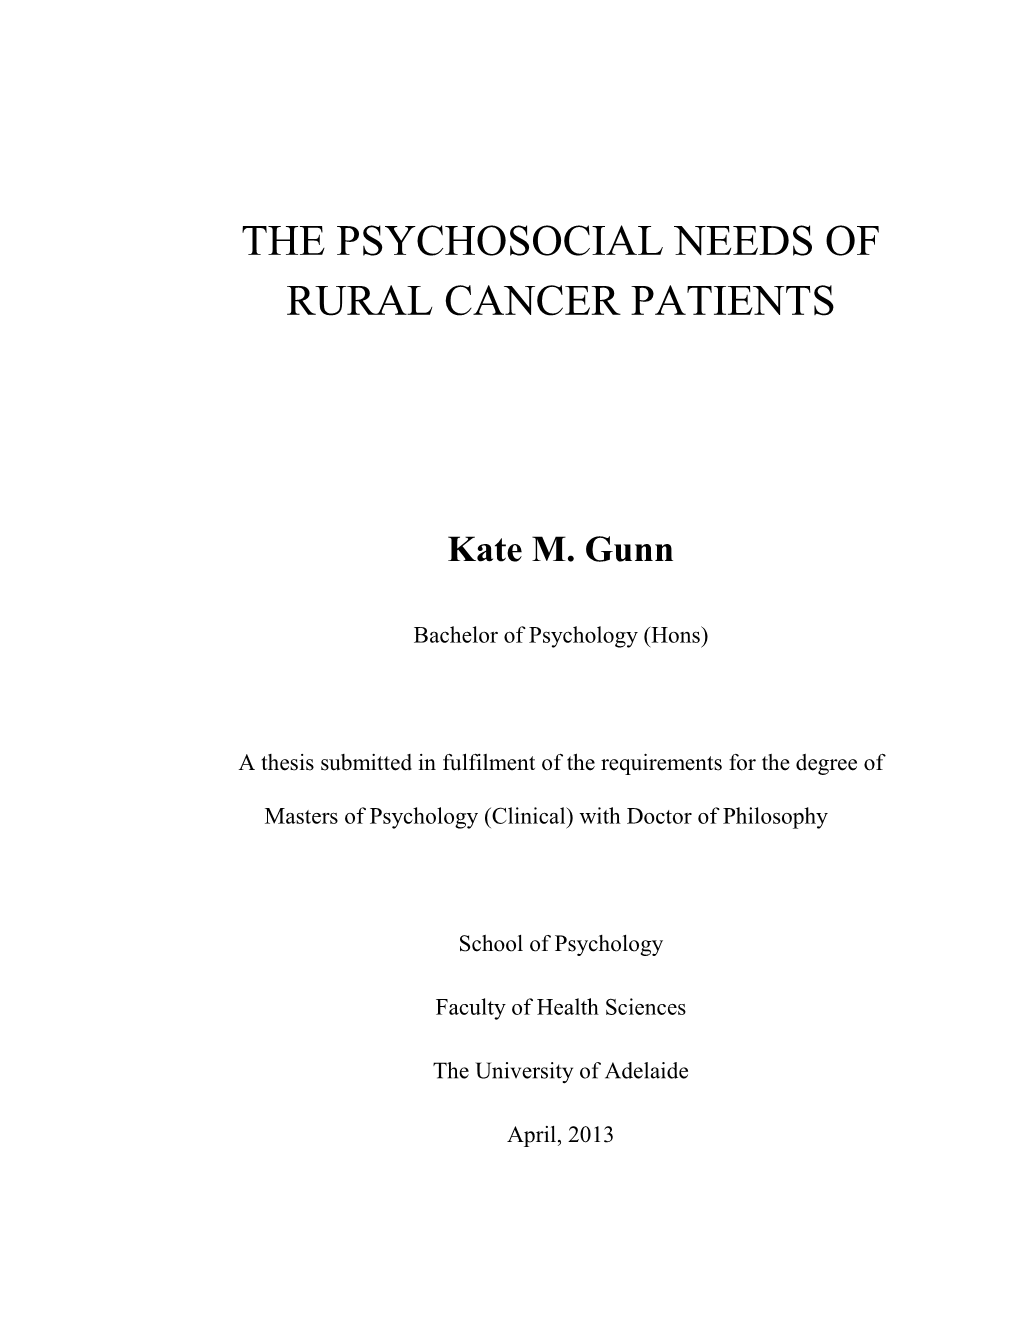 The Psychosocial Needs of Rural Cancer Patients